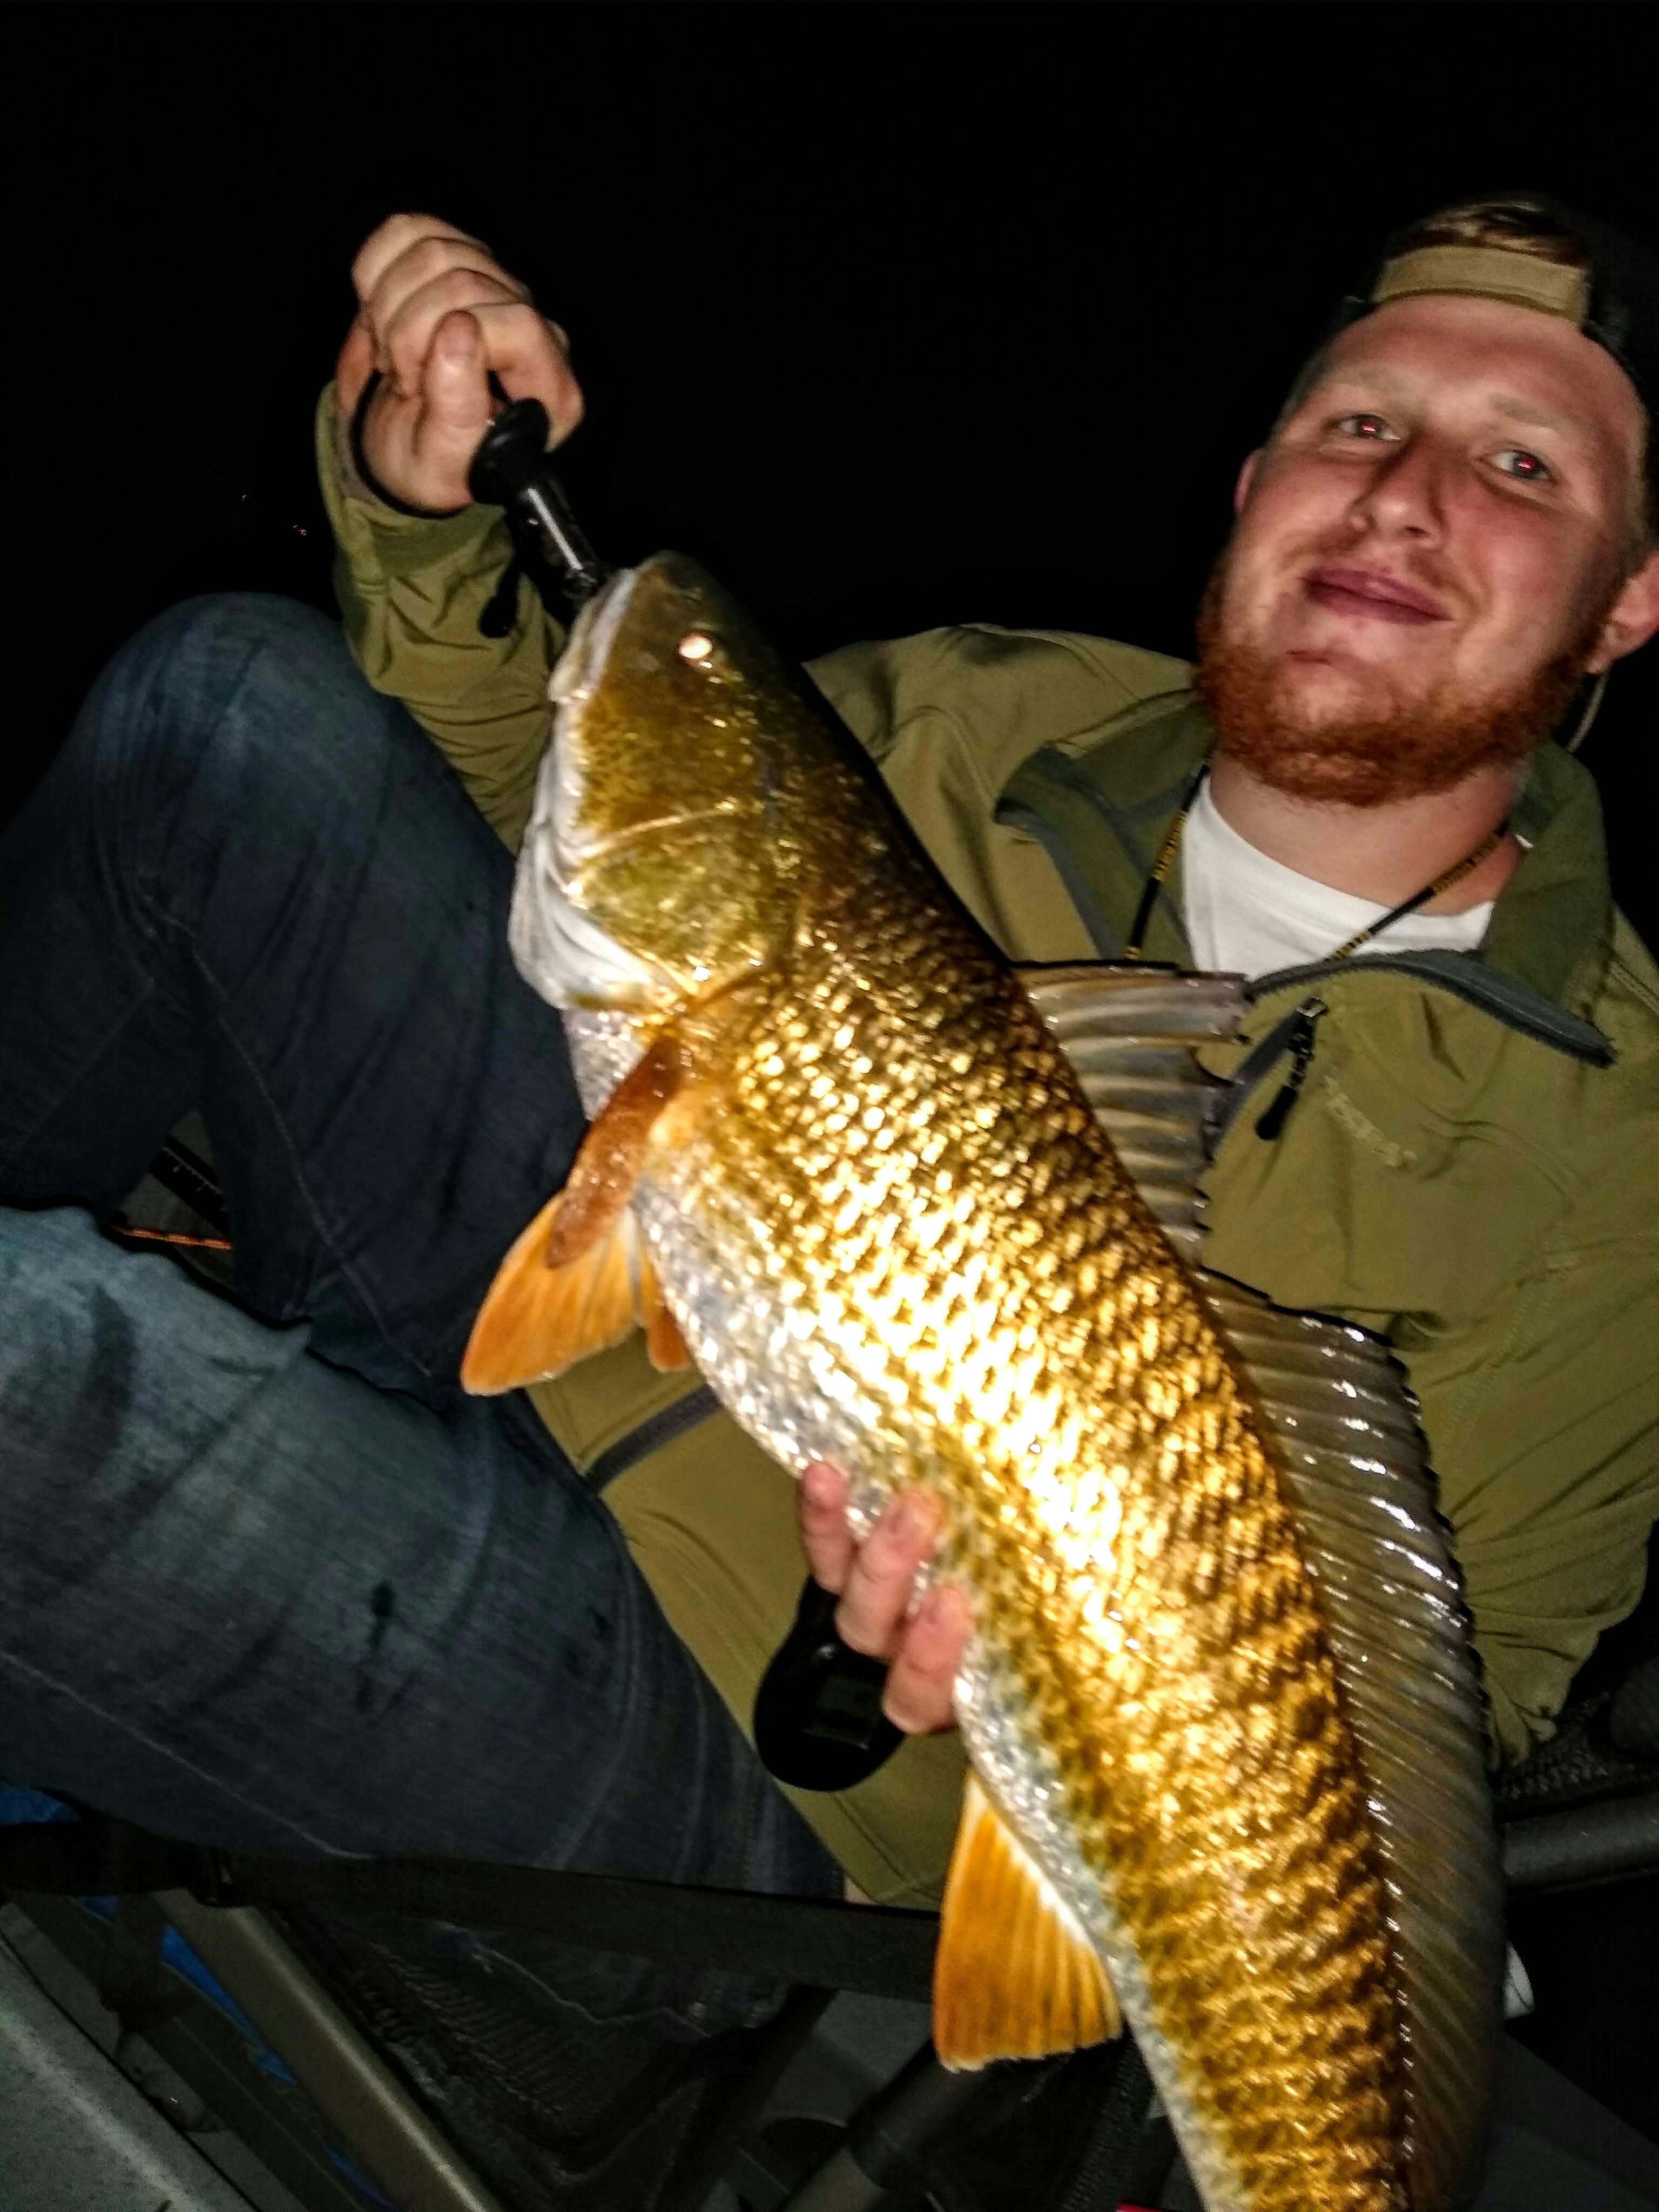 The author poses with a large redfish. The image is taken at night and both the man and the fish are illuminated by flash. 